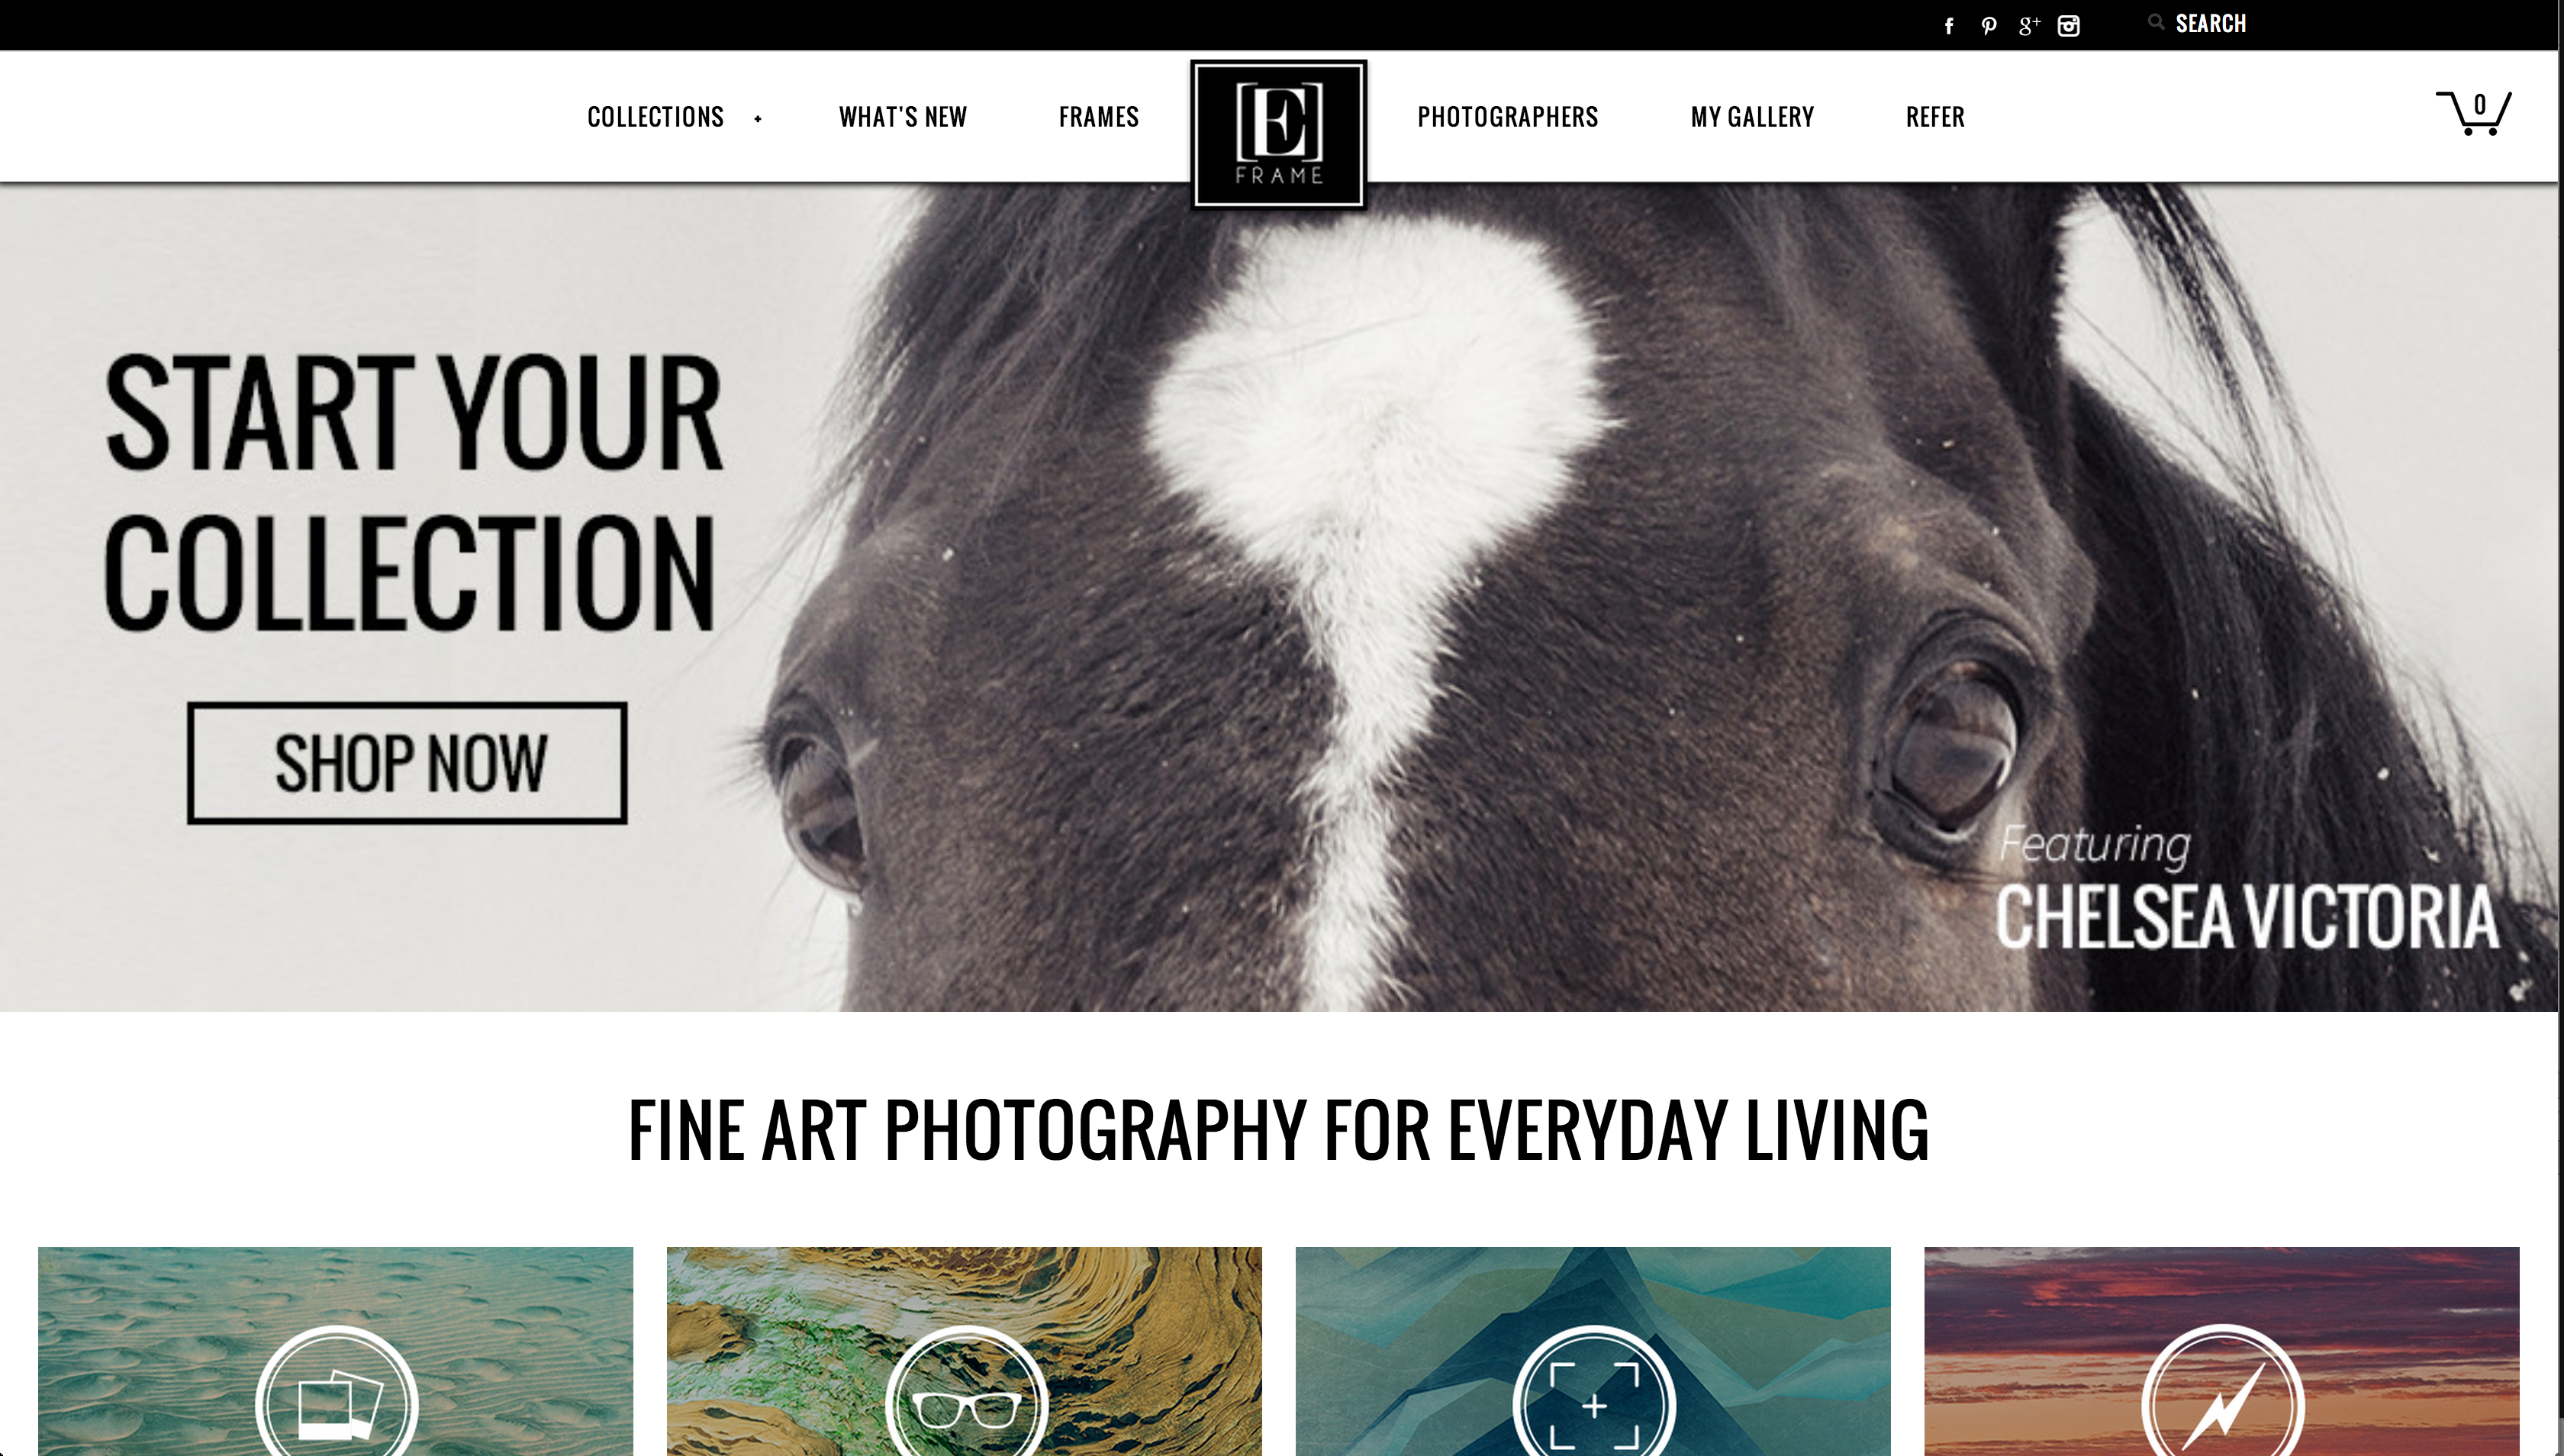 eFrame: Fine Art Photography For Everyday Living